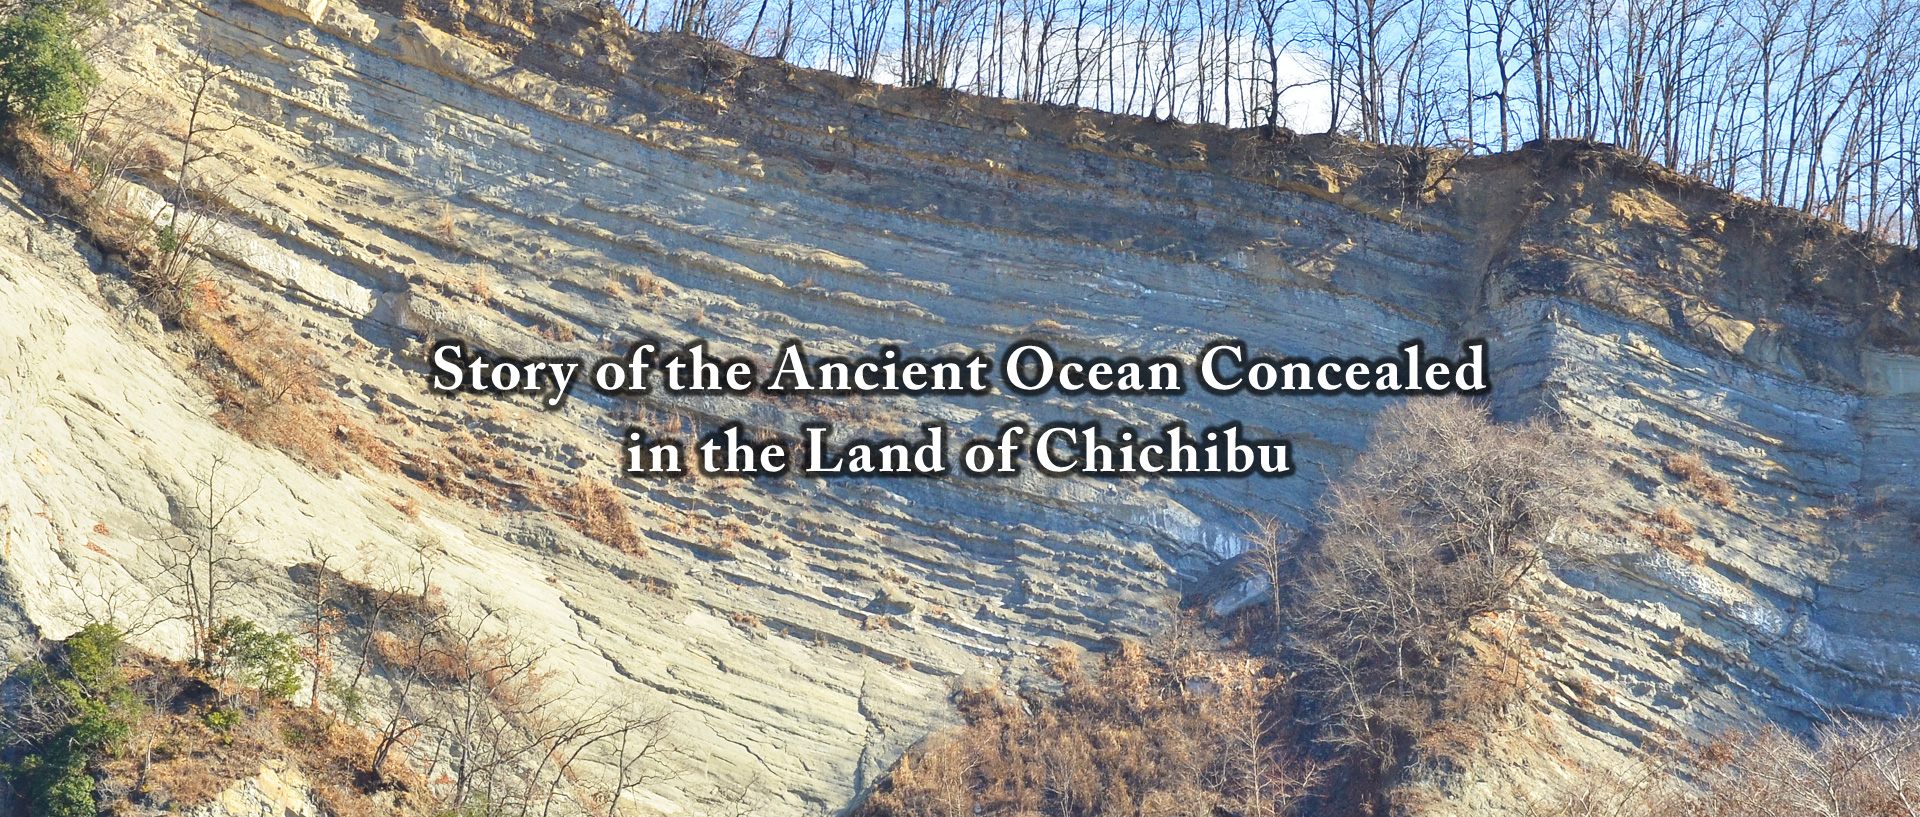 Story of the Ancient Ocean Concealed in the Land of Chichibu